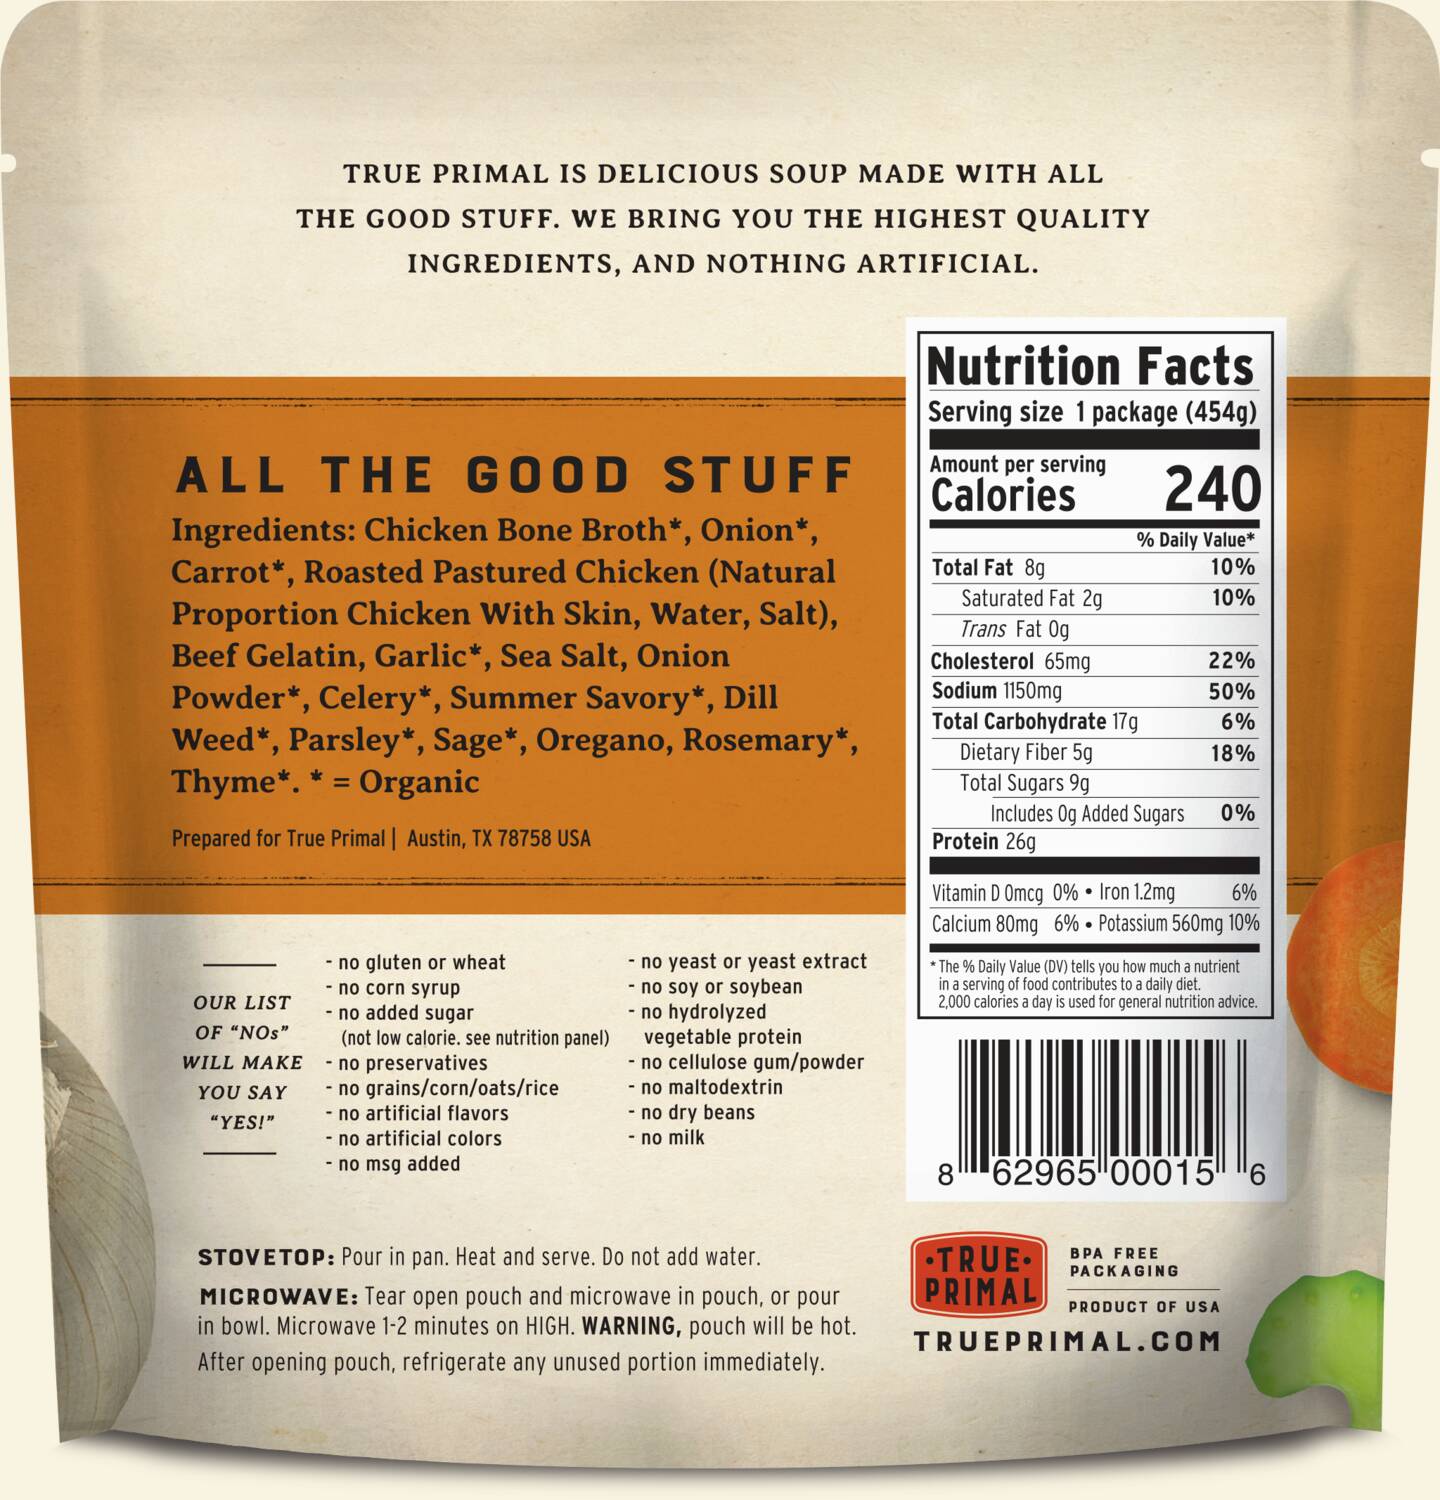 True Primal Roasted Chicken Soup in pouch, back of label. UPC: 862965000156.